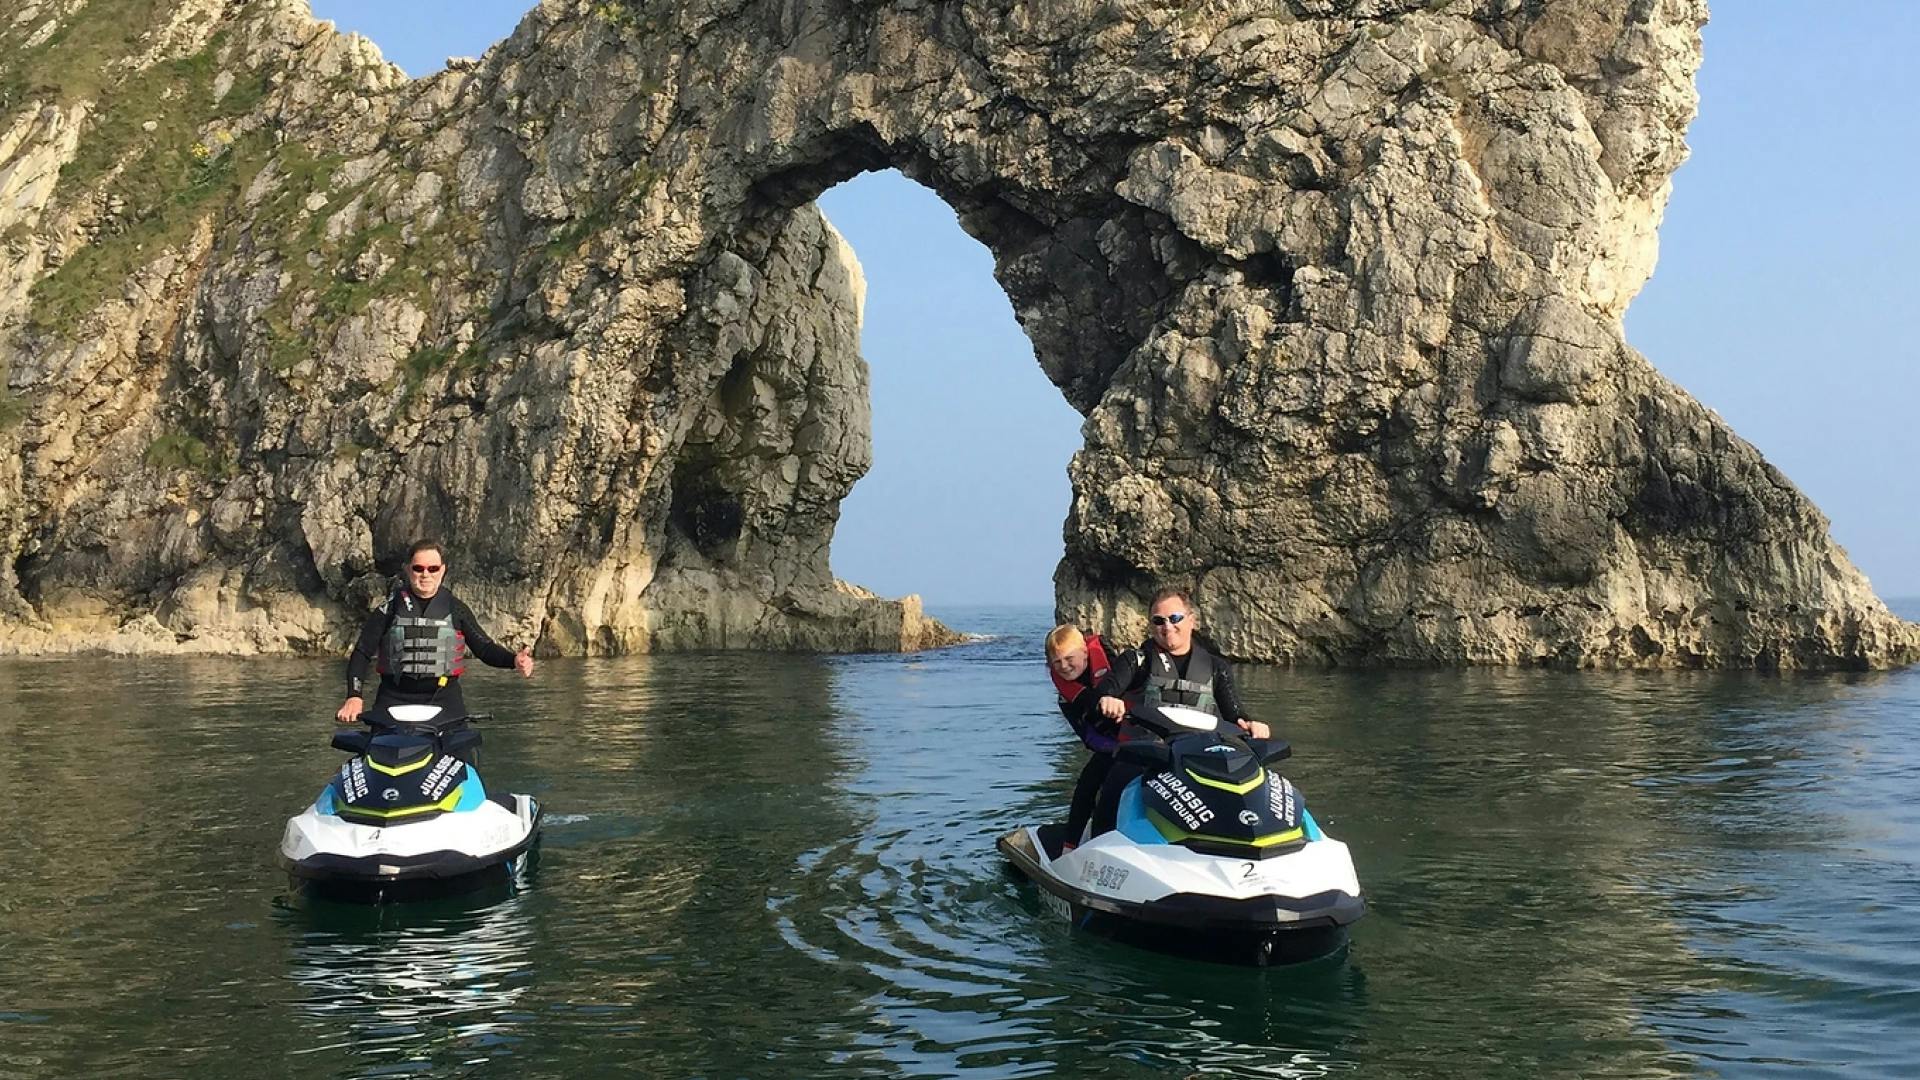 Jet Ski Rides and Tours from Weymouth